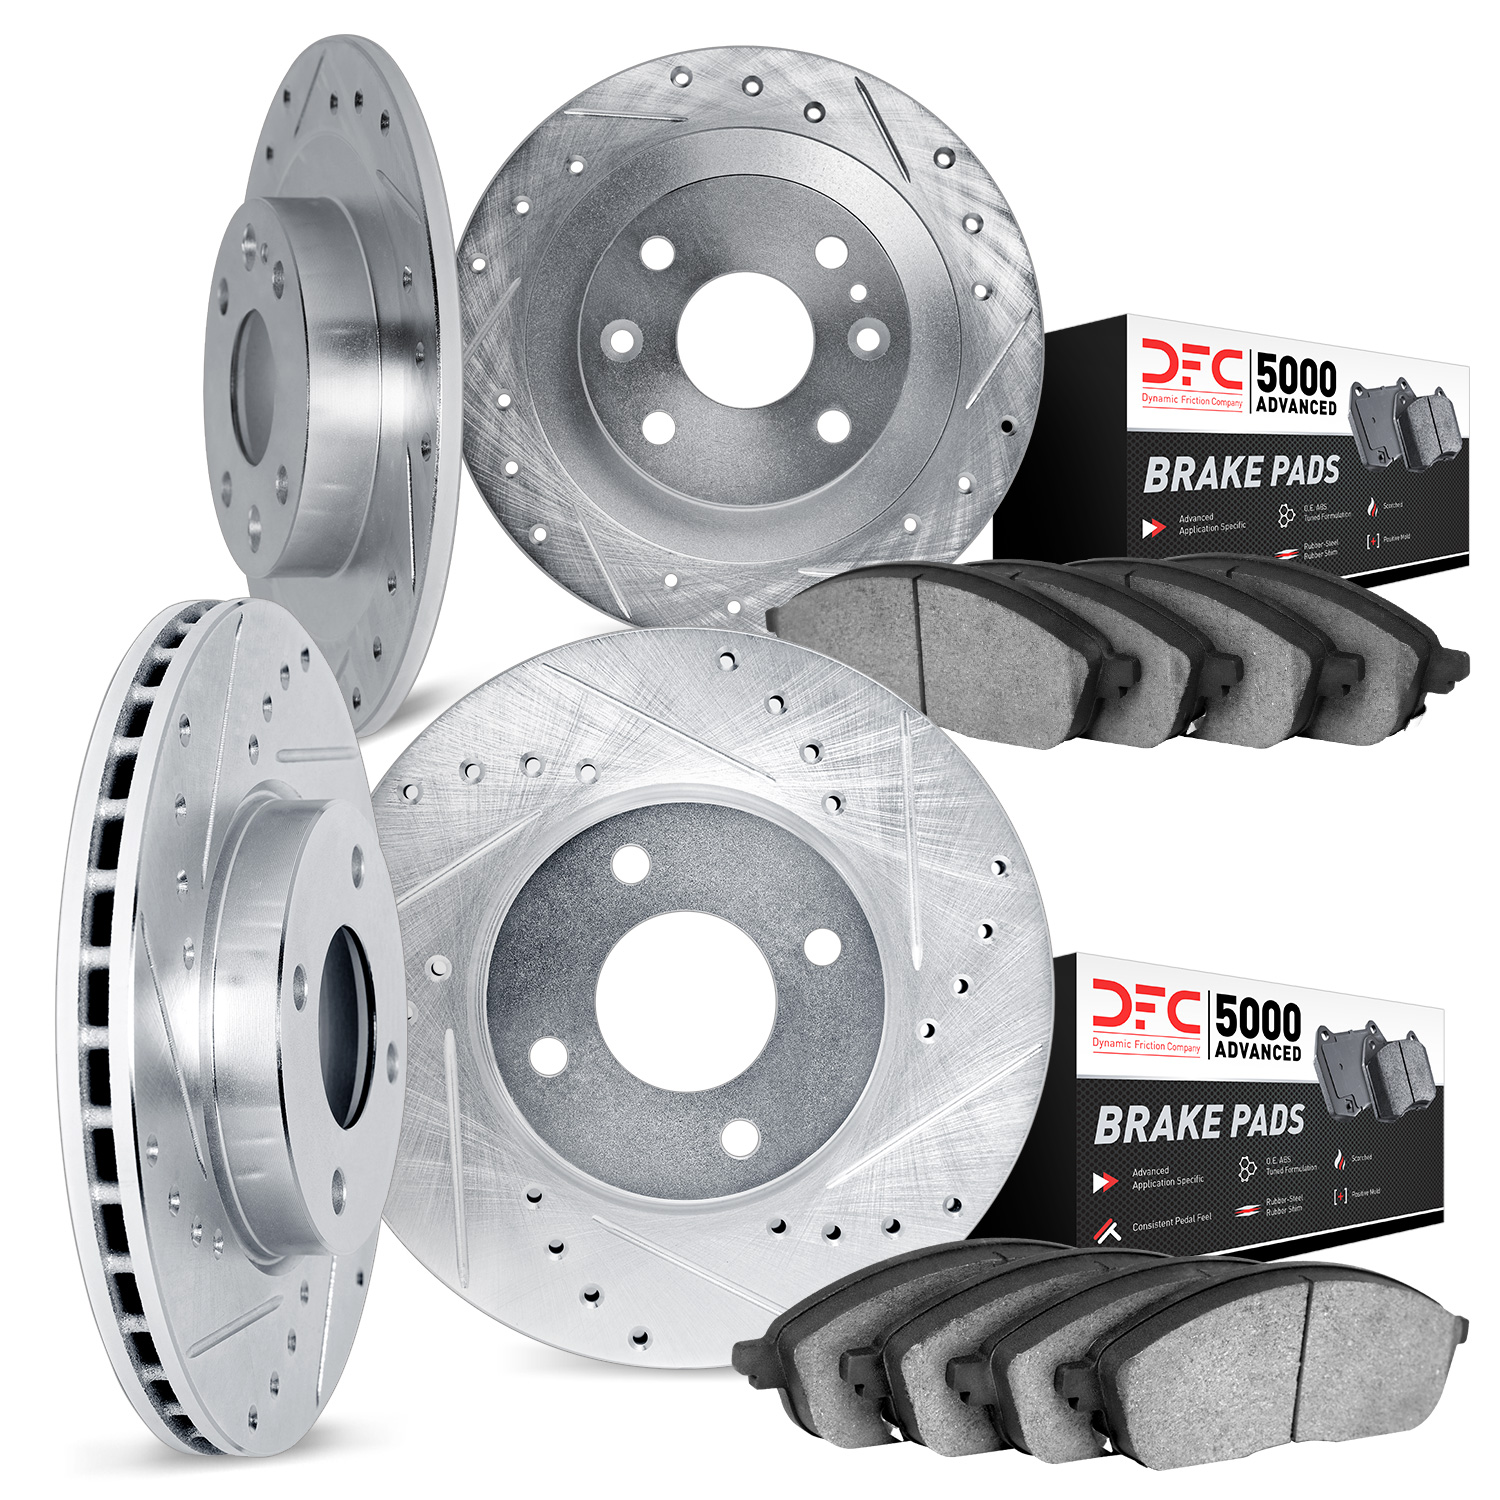 7504-28003 Drilled/Slotted Brake Rotors w/5000 Advanced Brake Pads Kit [Silver], 1977-1989 Peugeot, Position: Front and Rear